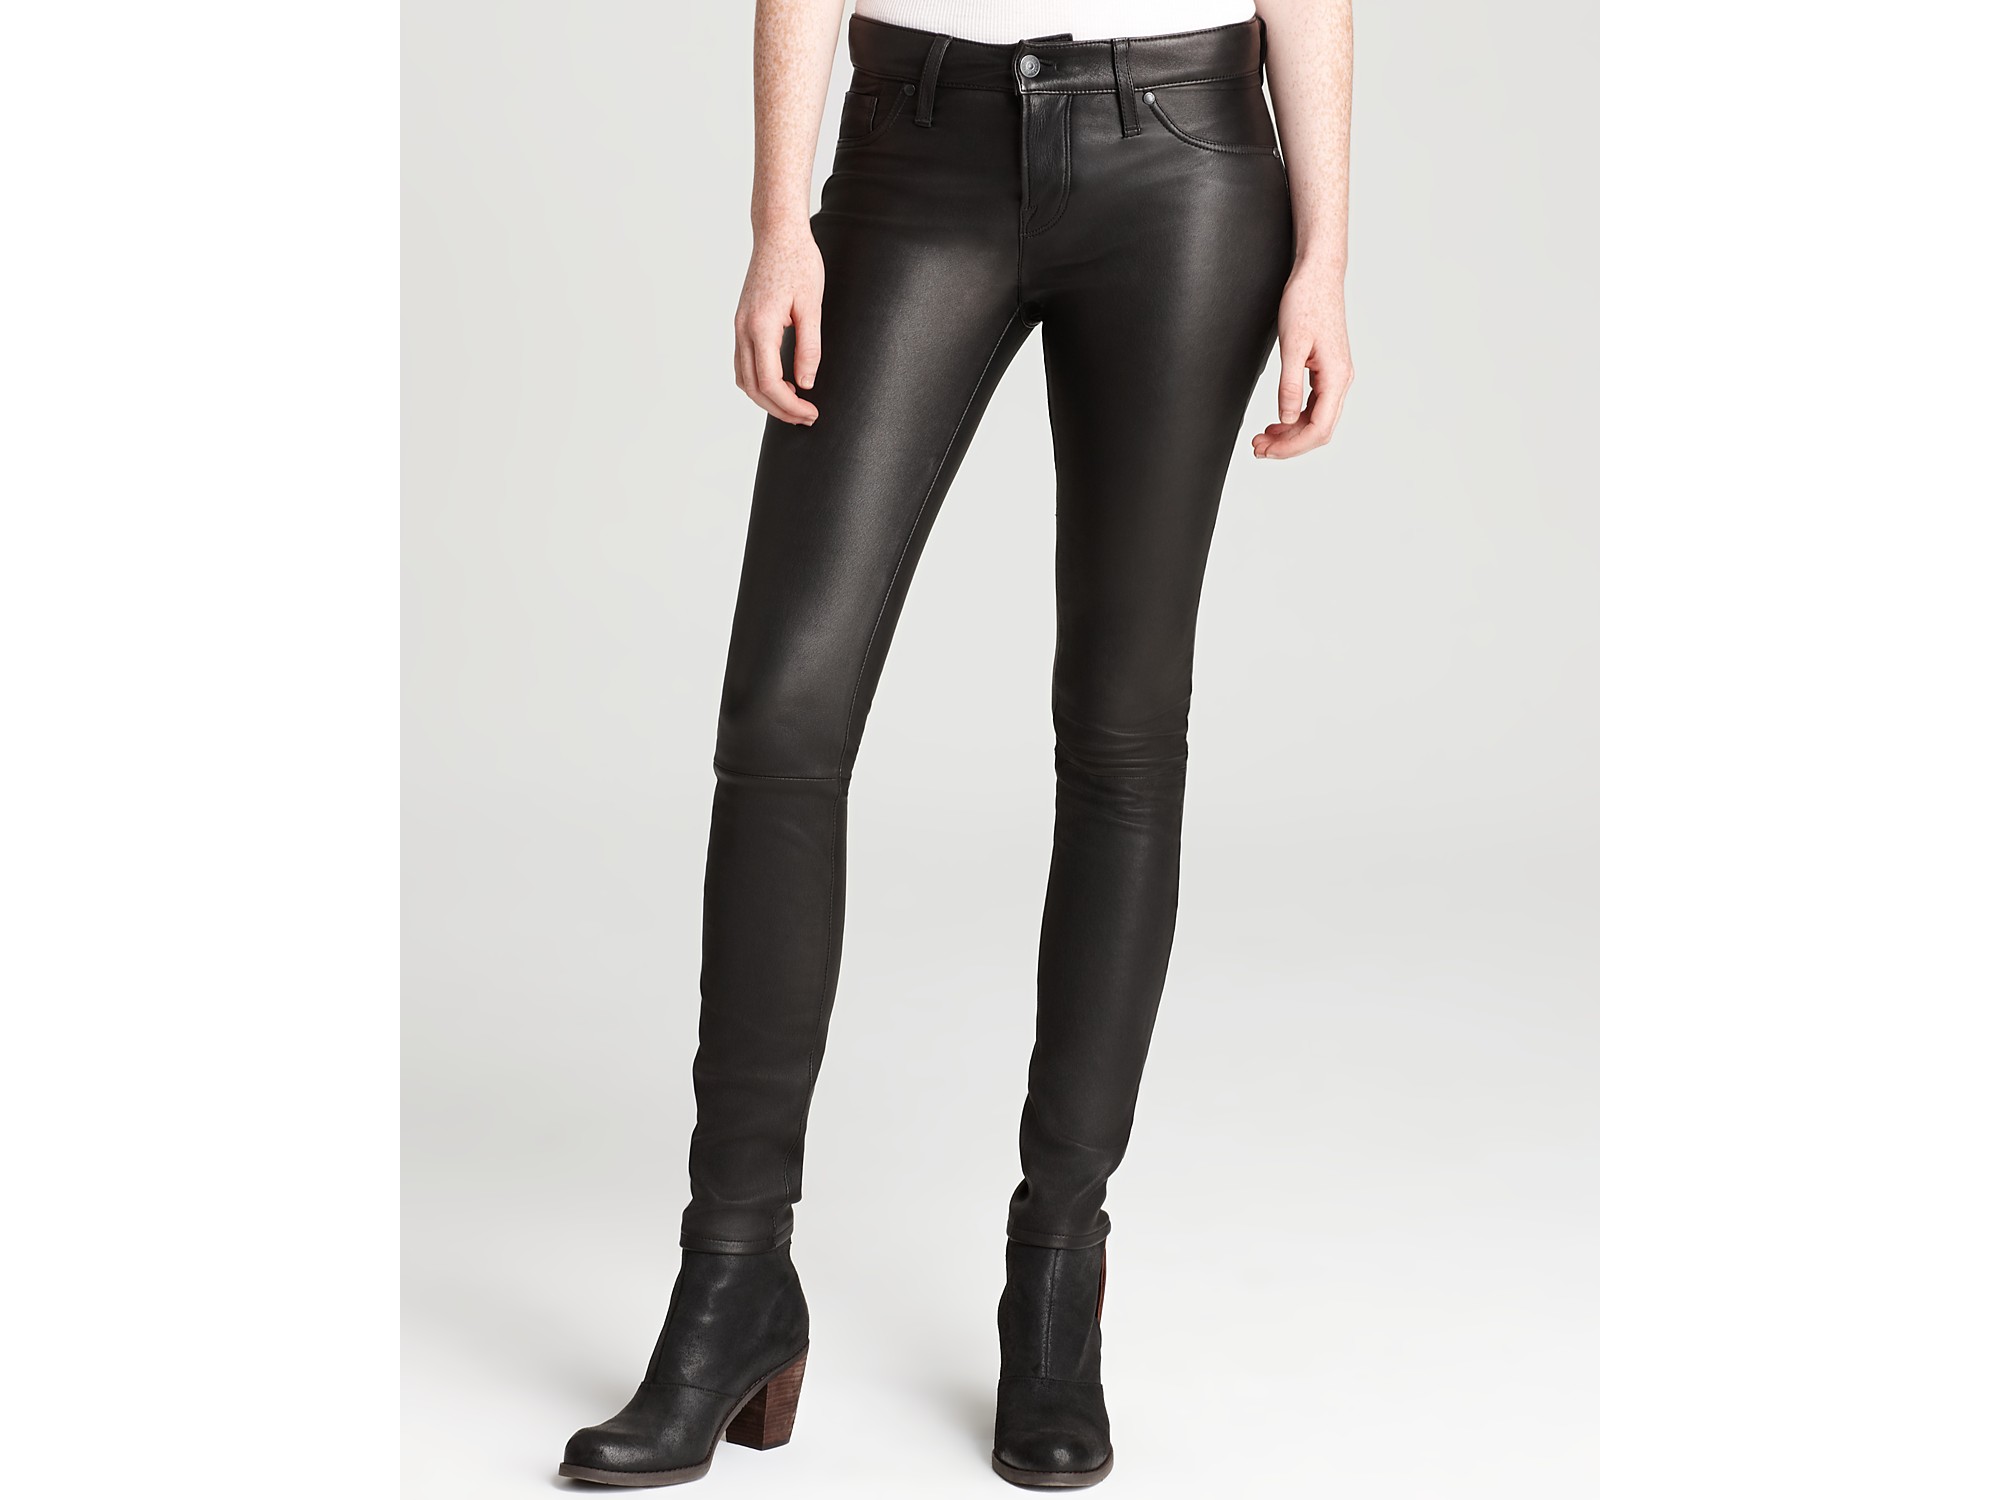 Marc By Marc Jacobs Leather Leggings in Black - Lyst